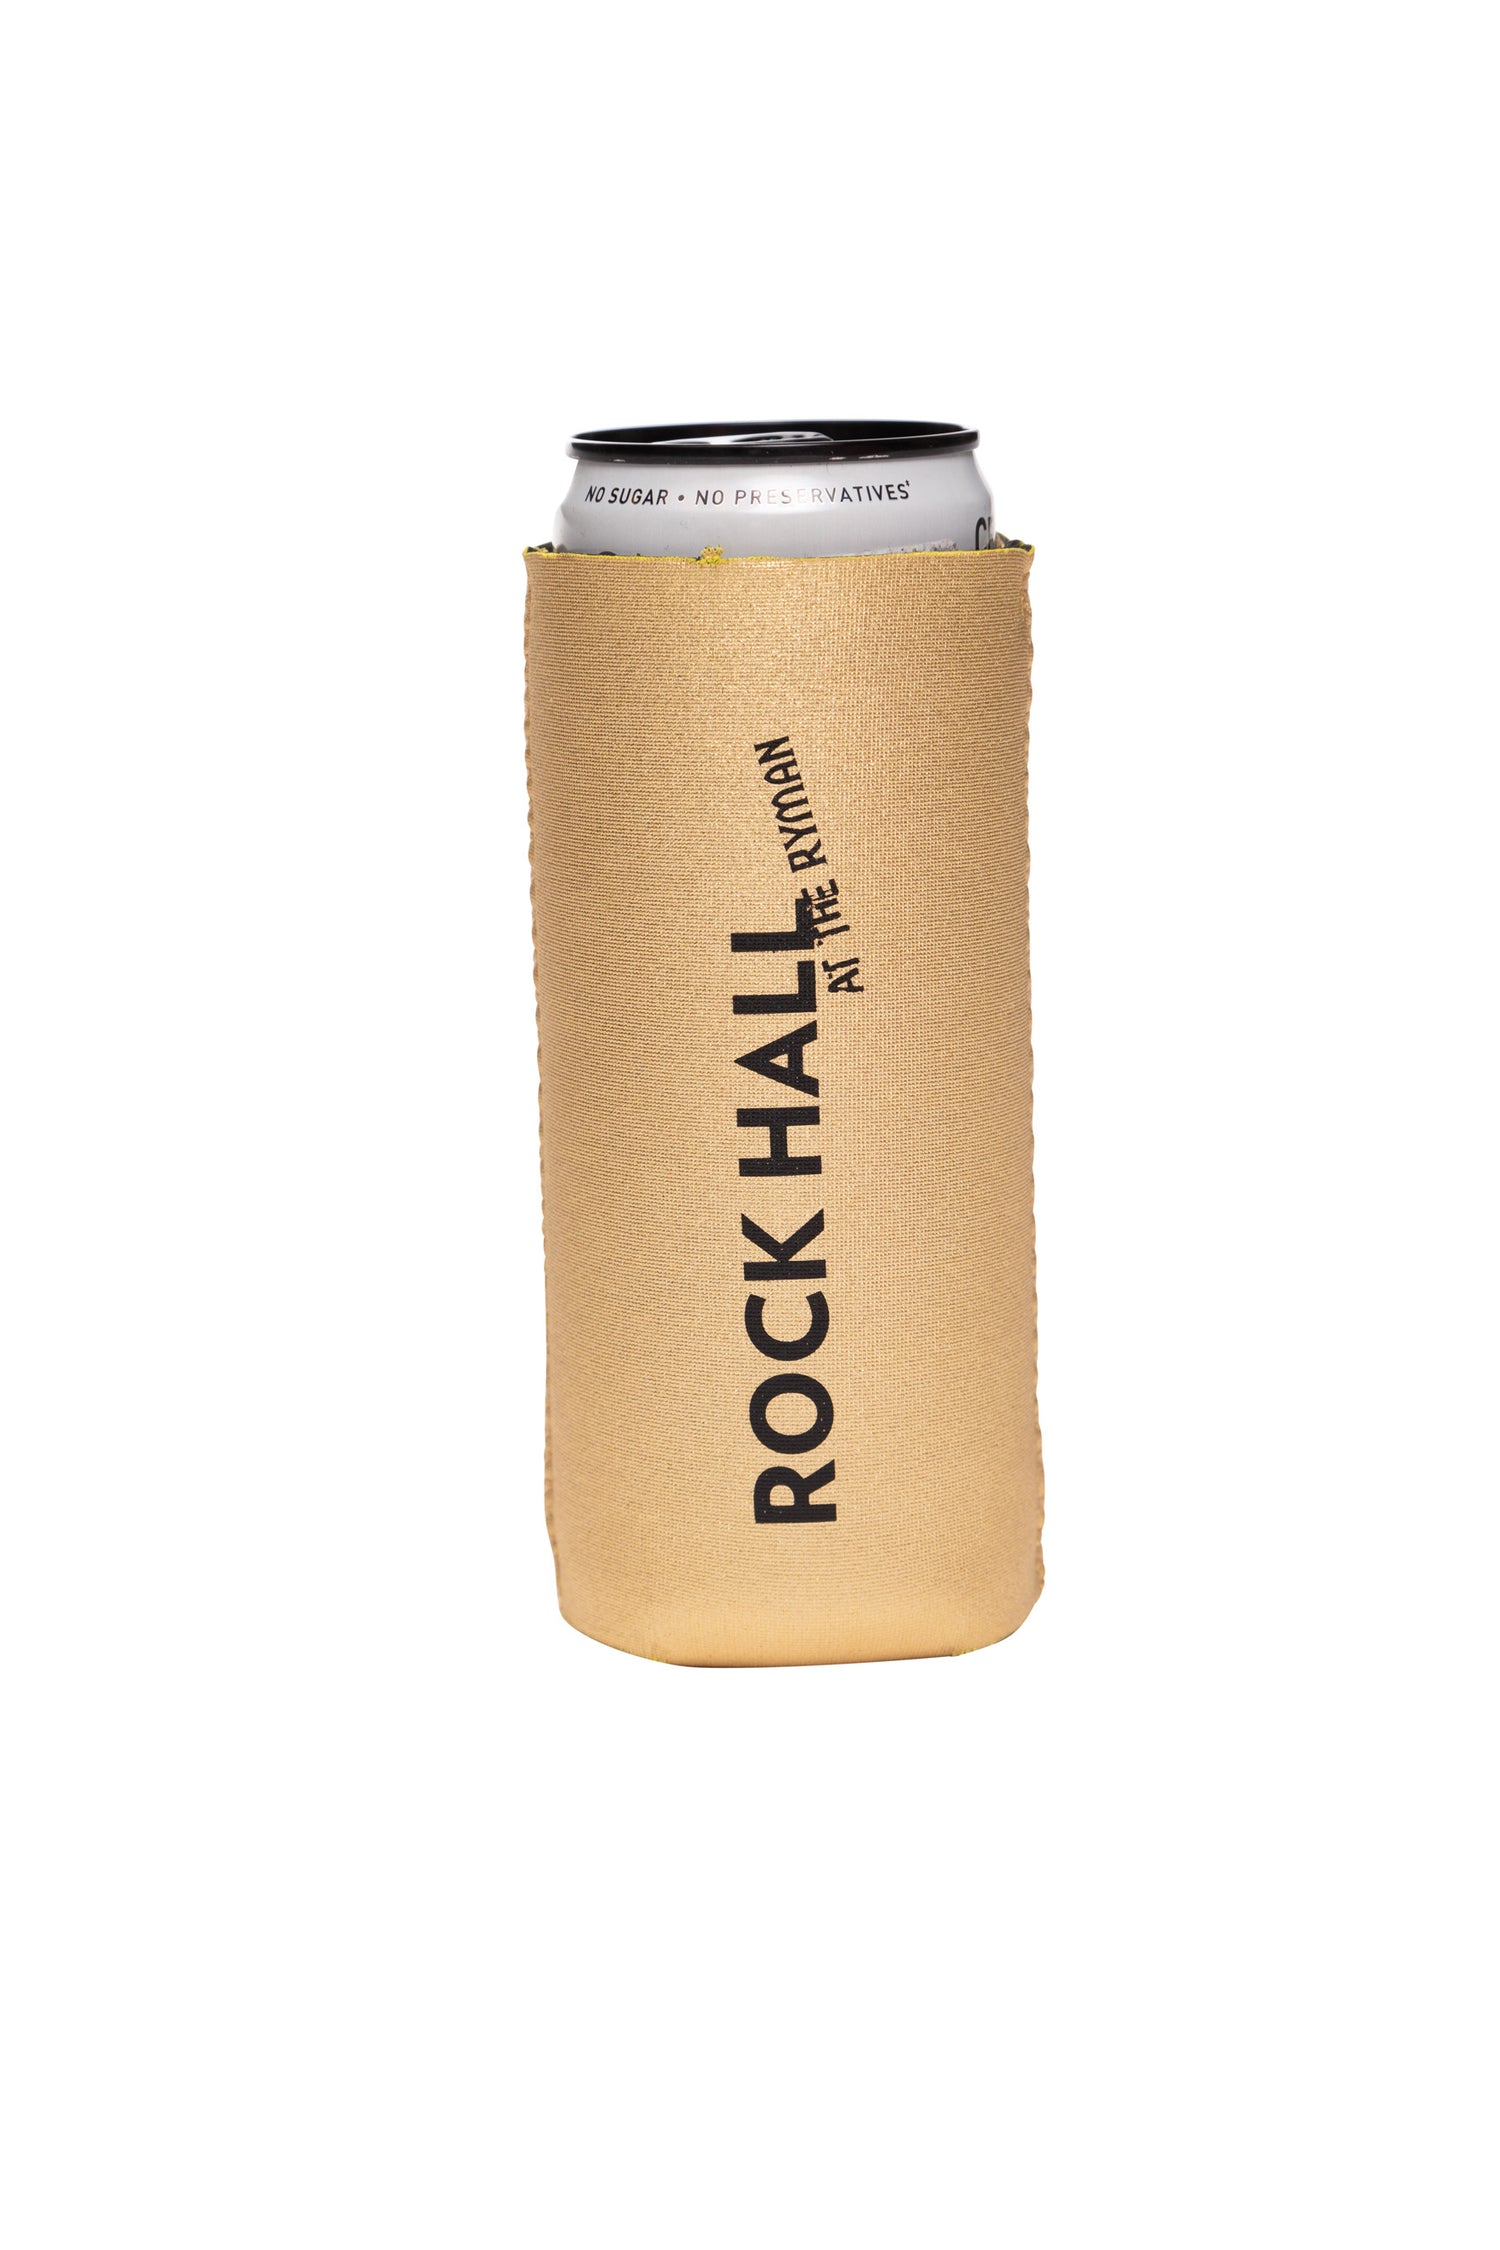 Rock Hall at The Ryman Slim Can Koozie in Gold